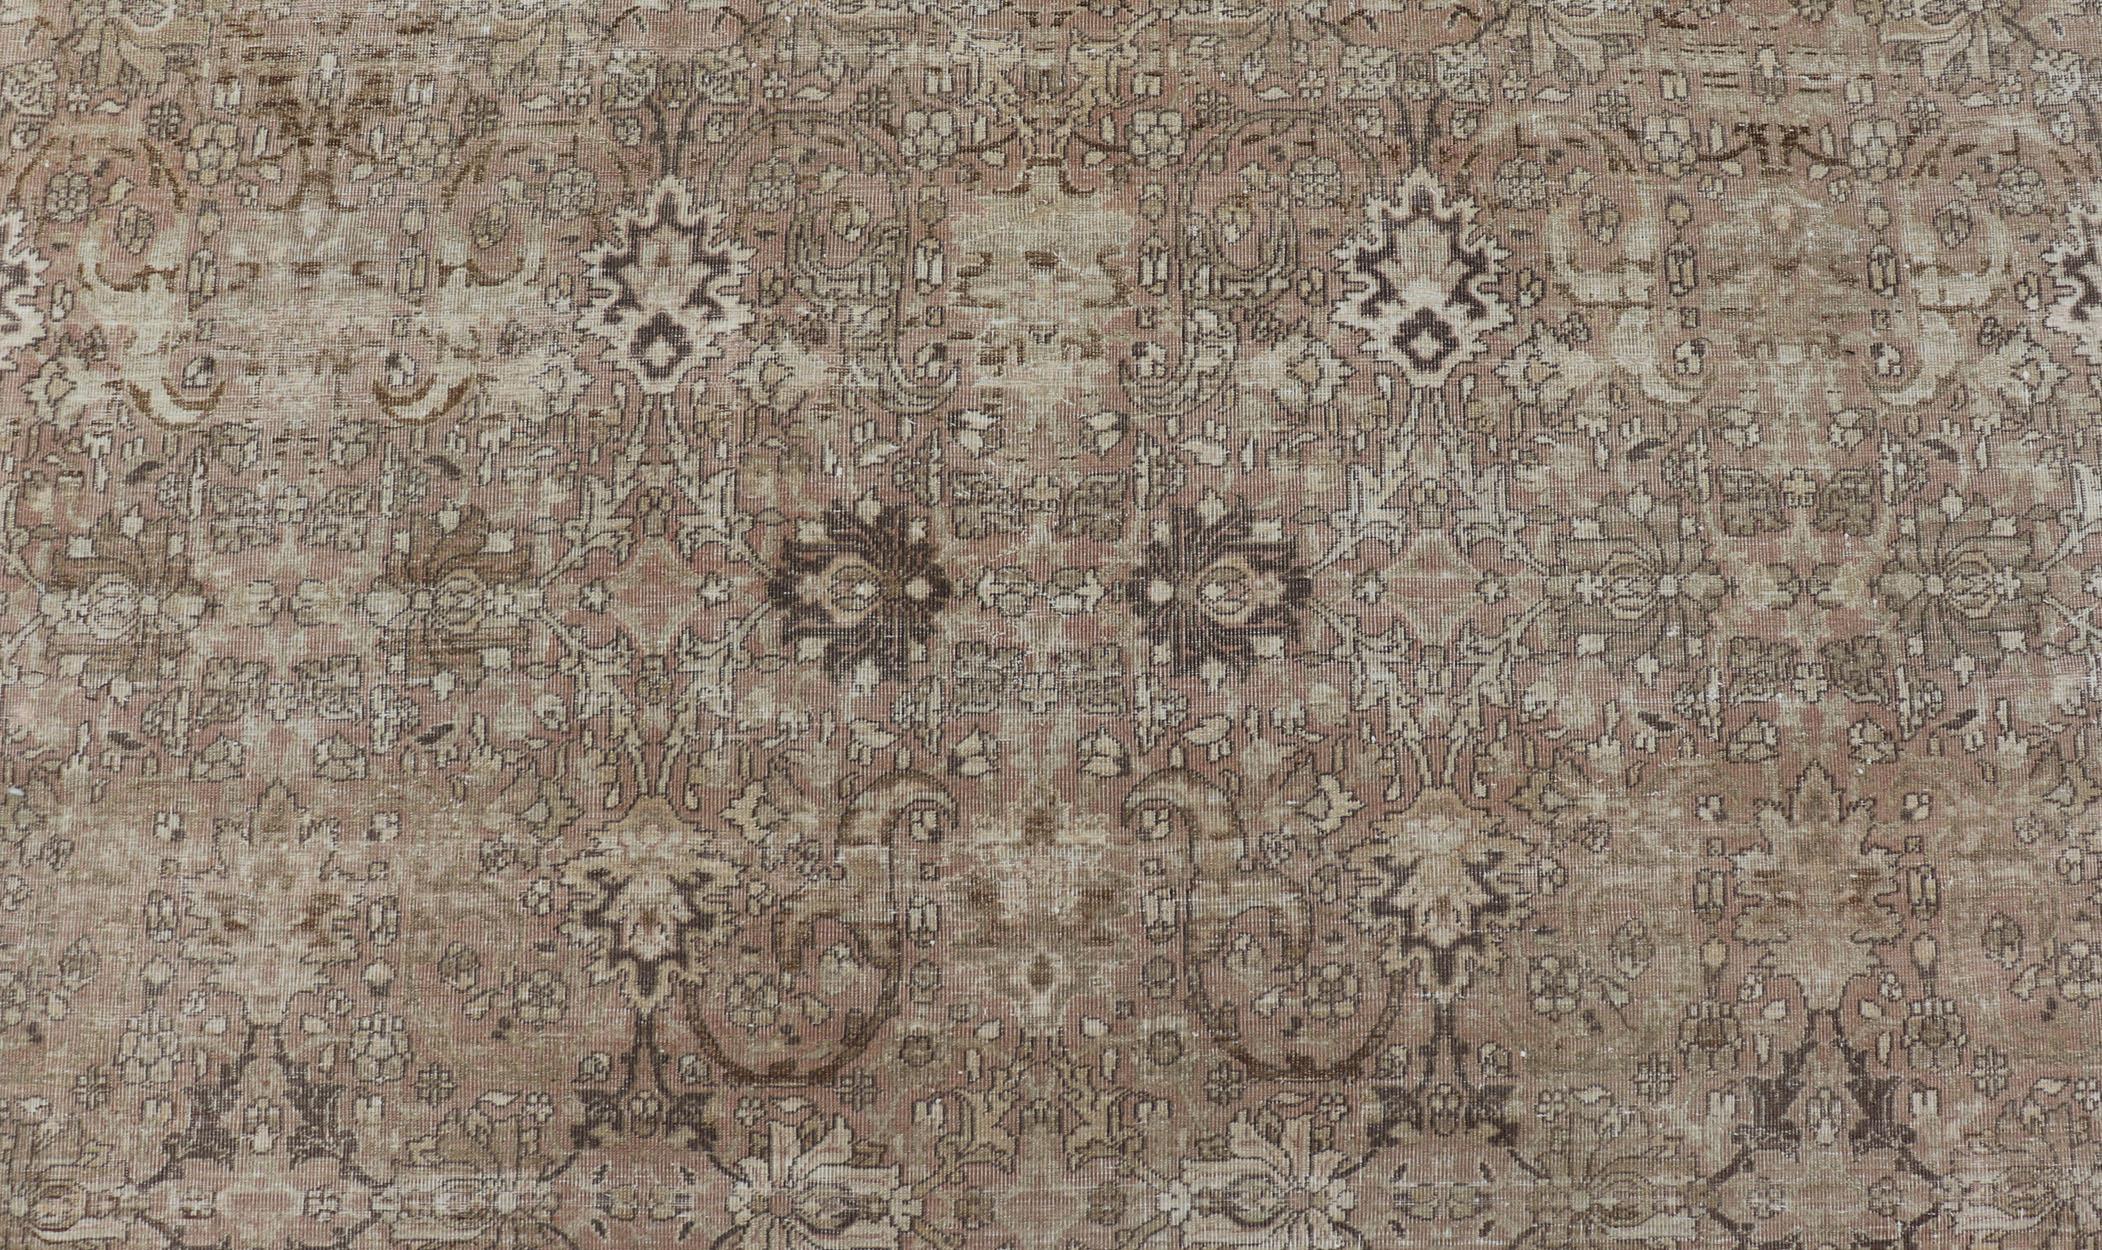 Oushak Large Antique Turkish Sivas Rug with Floral Design in Earthy Neutral Tones  For Sale